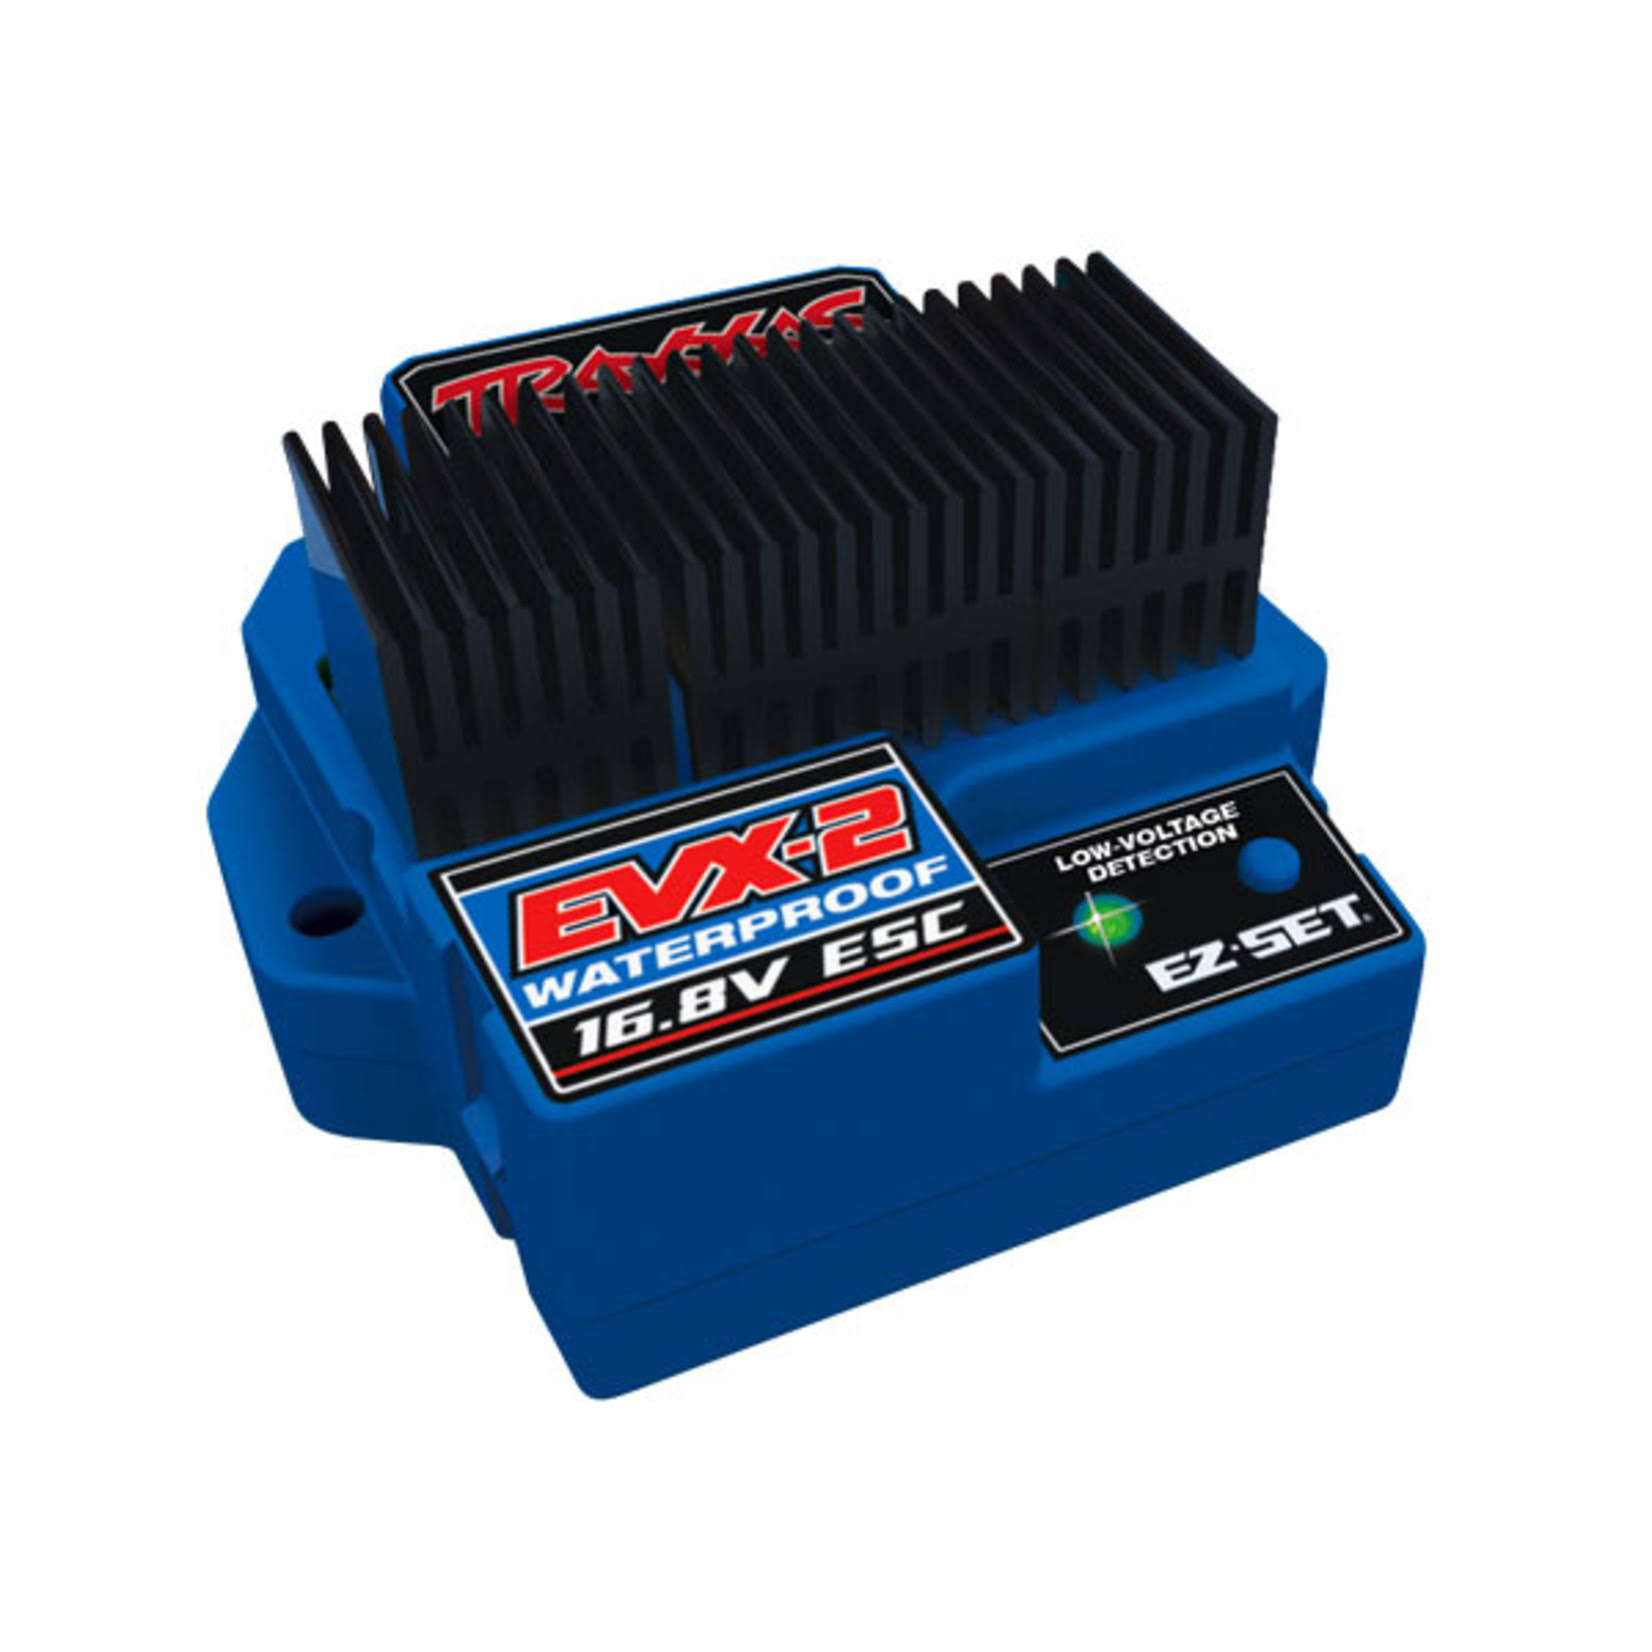 Traxxas Waterproof Esc with Low Voltage Detection